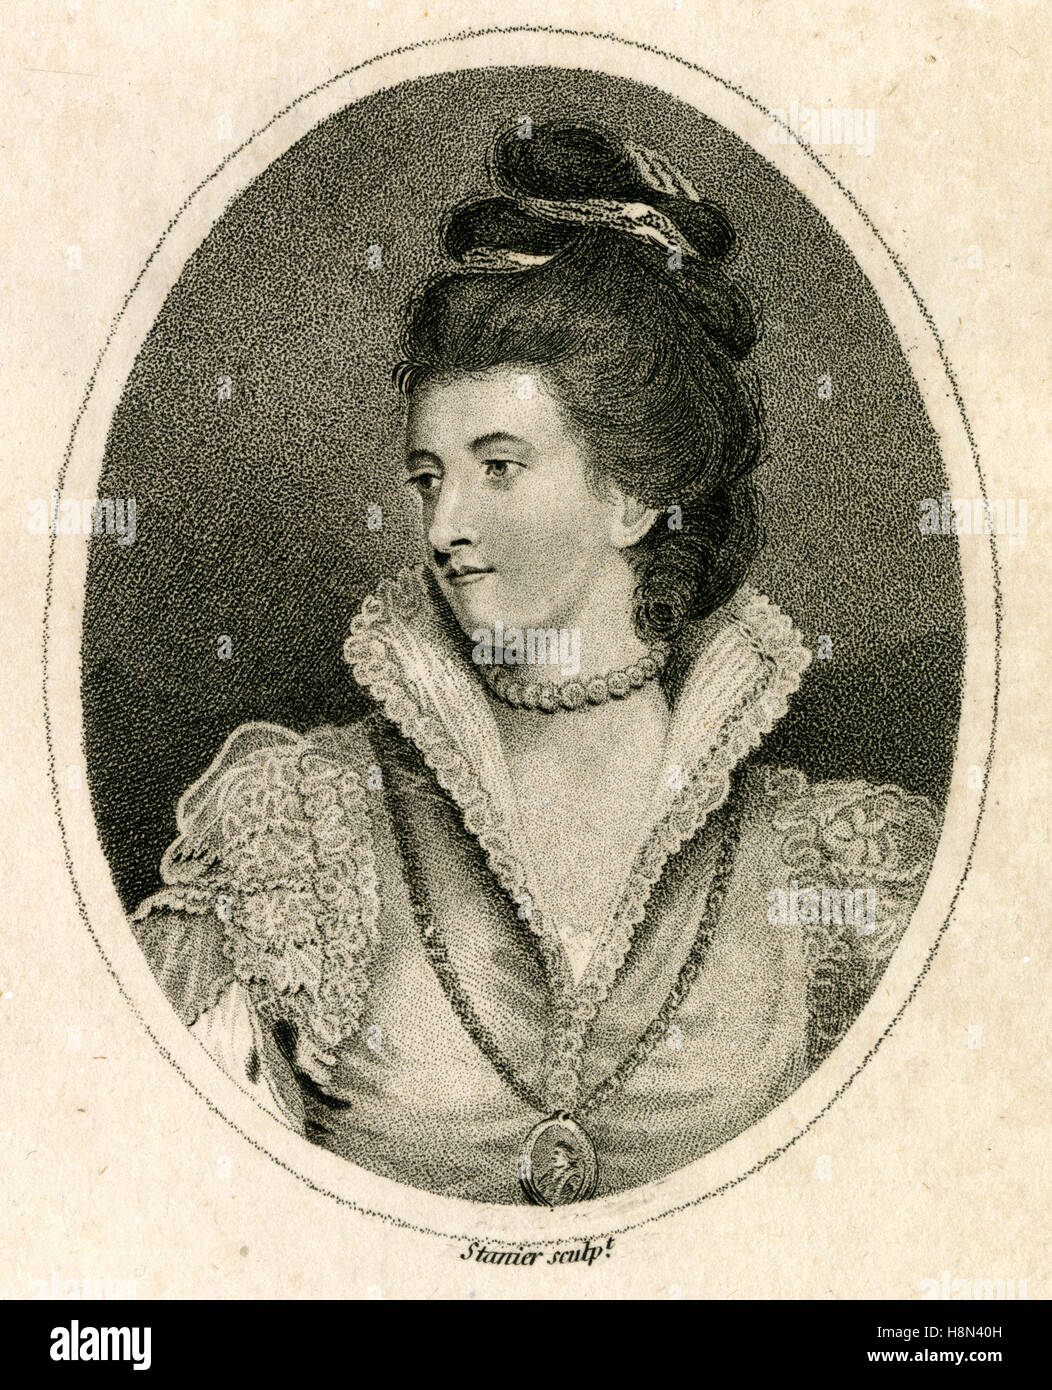 Antique 1791 engraving, Jane Gordon, Duchess of Gordon. Jane Gordon (1749-1812), née Lady Jane Maxwell, was a Scottish Tory political hostess. Together with her husband Alexander, 4th Duke of Gordon and her son George, Marquess of Huntly, the future 5th Duke of Gordon she founded the Gordon Highlanders, a British Army infantry regiment that existed until 1994. SOURCE: ORIGINAL STEEL ENGRAVING. SOURCE: ORIGINAL ENGRAVING. Stock Photo